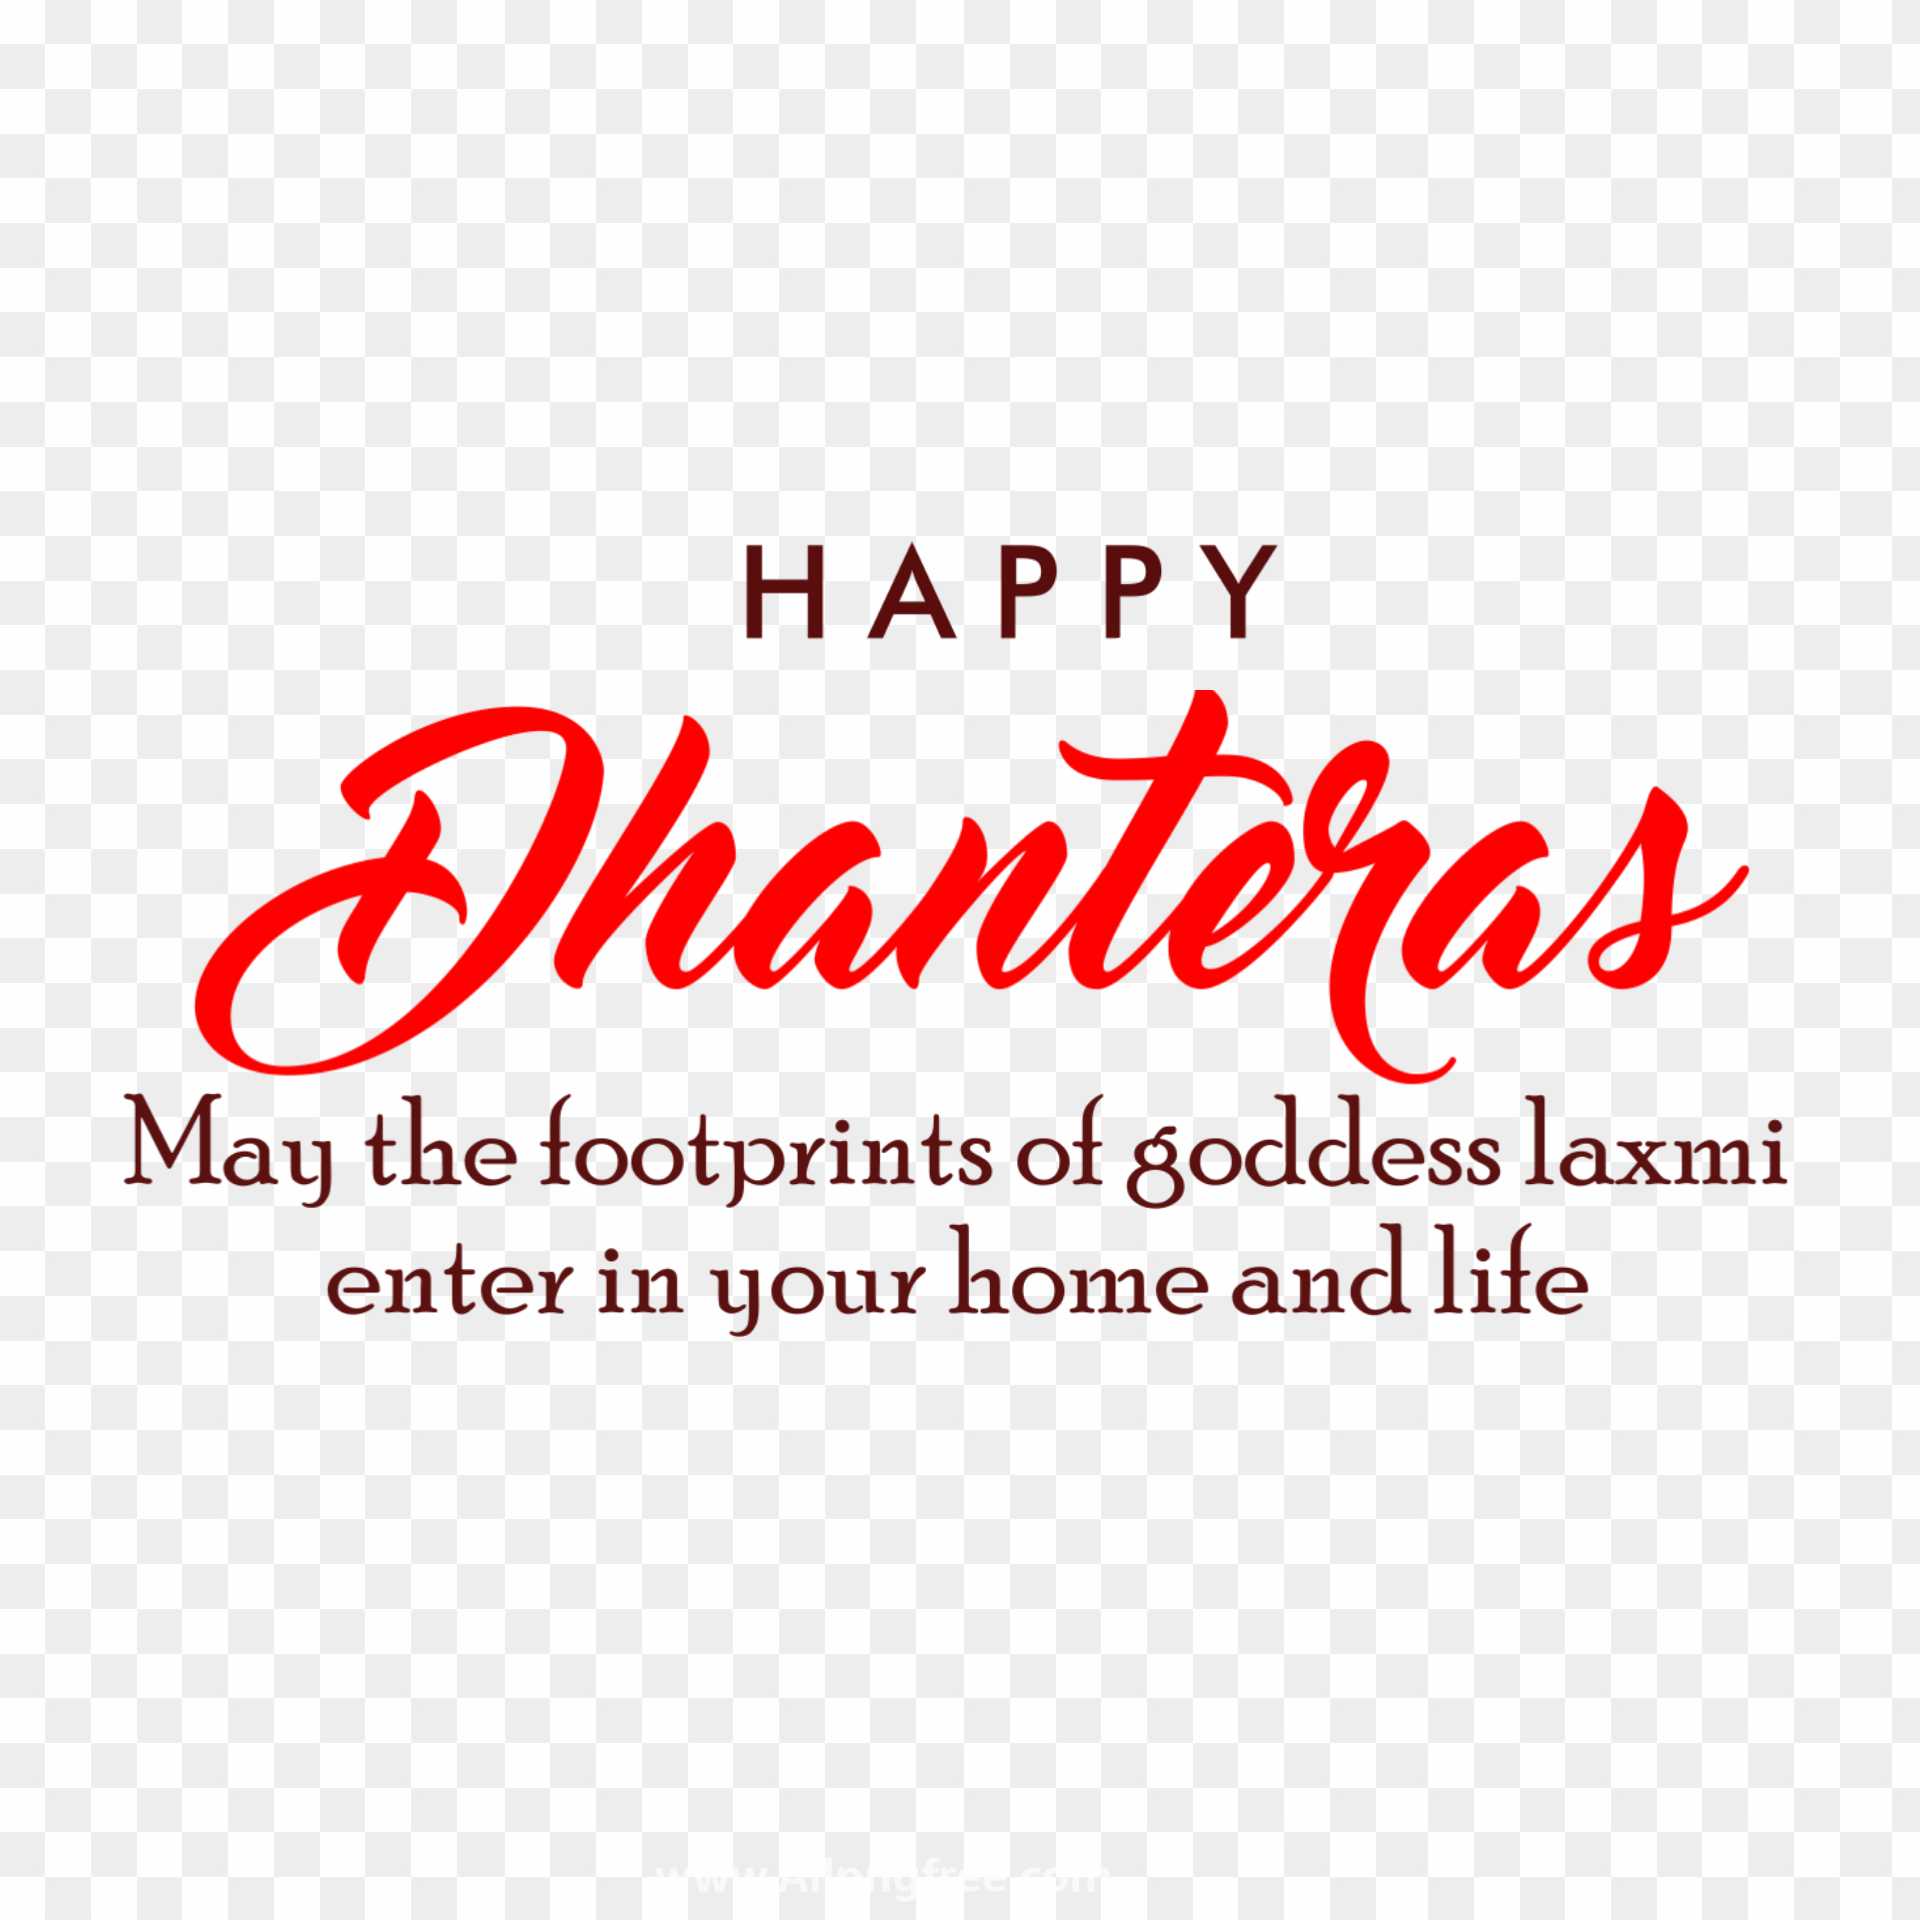 Dhanteras quotes in English images , Happy Dhanteras png transparent image 